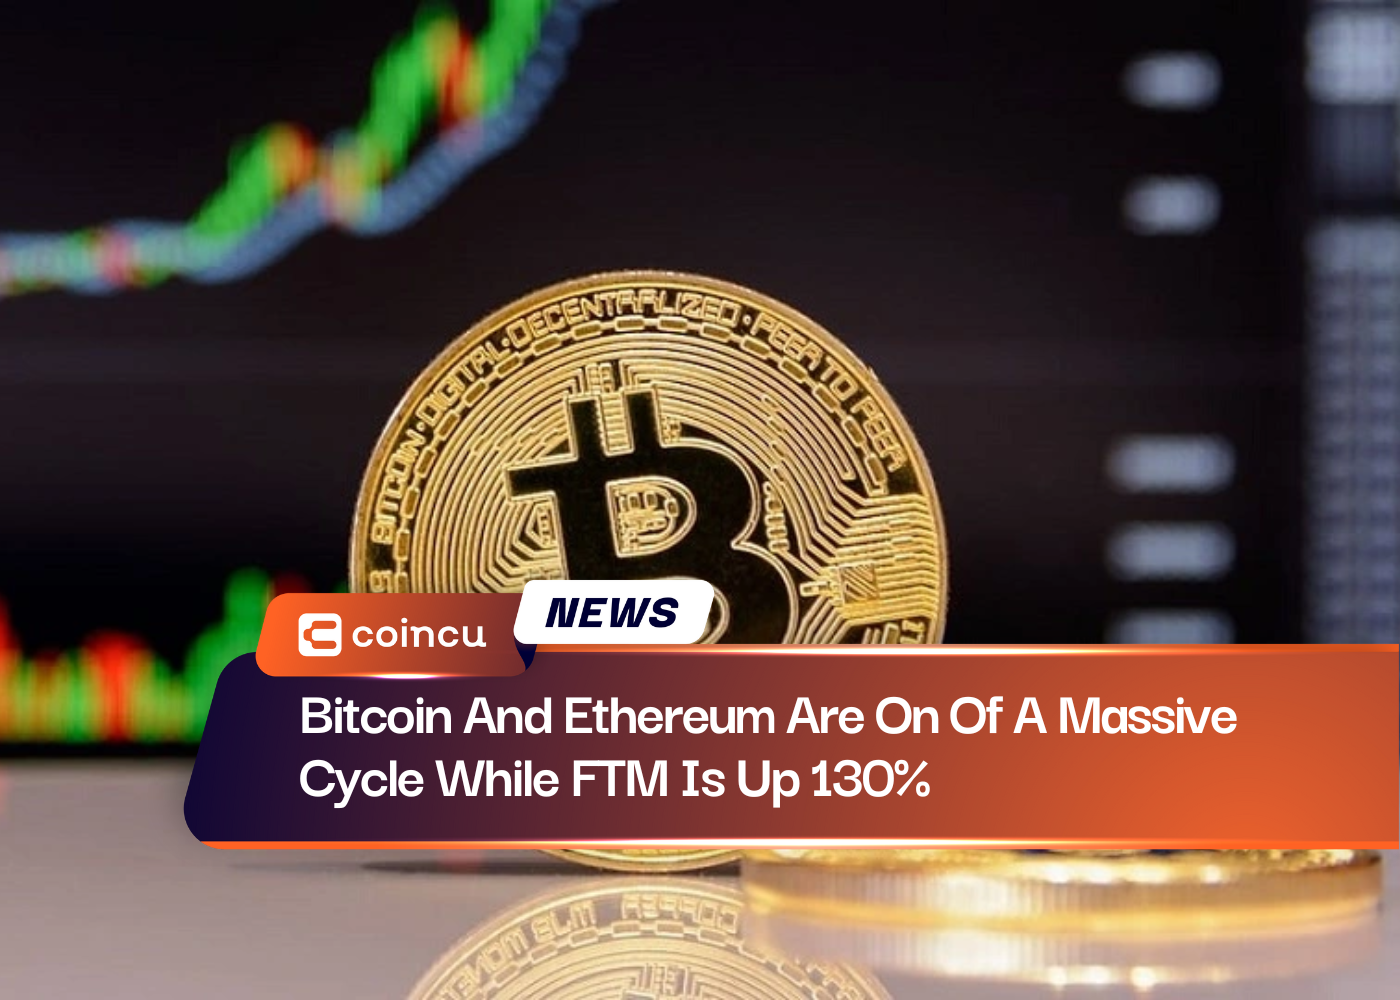 Bitcoin And Ethereum Are On Of A Massive Cycle While FTM Is Up 130%